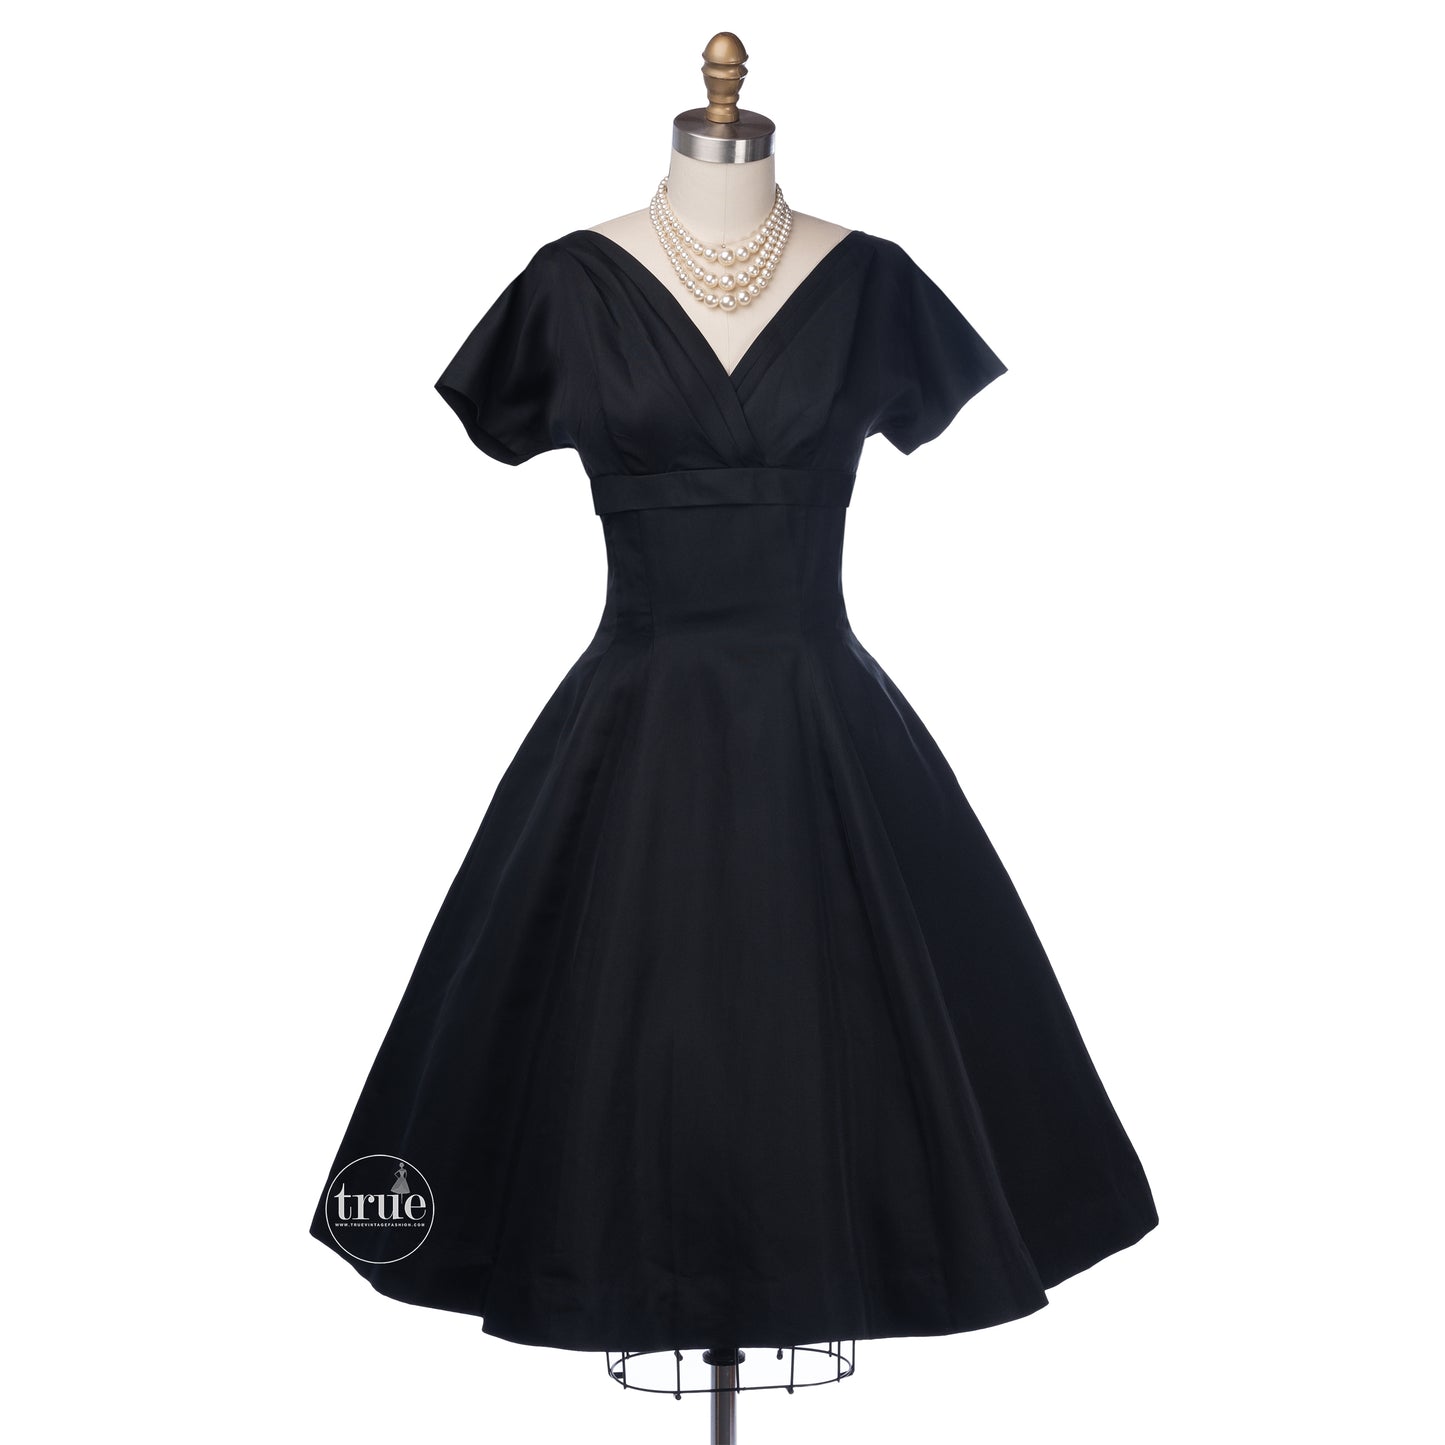 vintage 1950's dress ...simple elegance Madeleine Fauth black full skirt dress with streaming bow